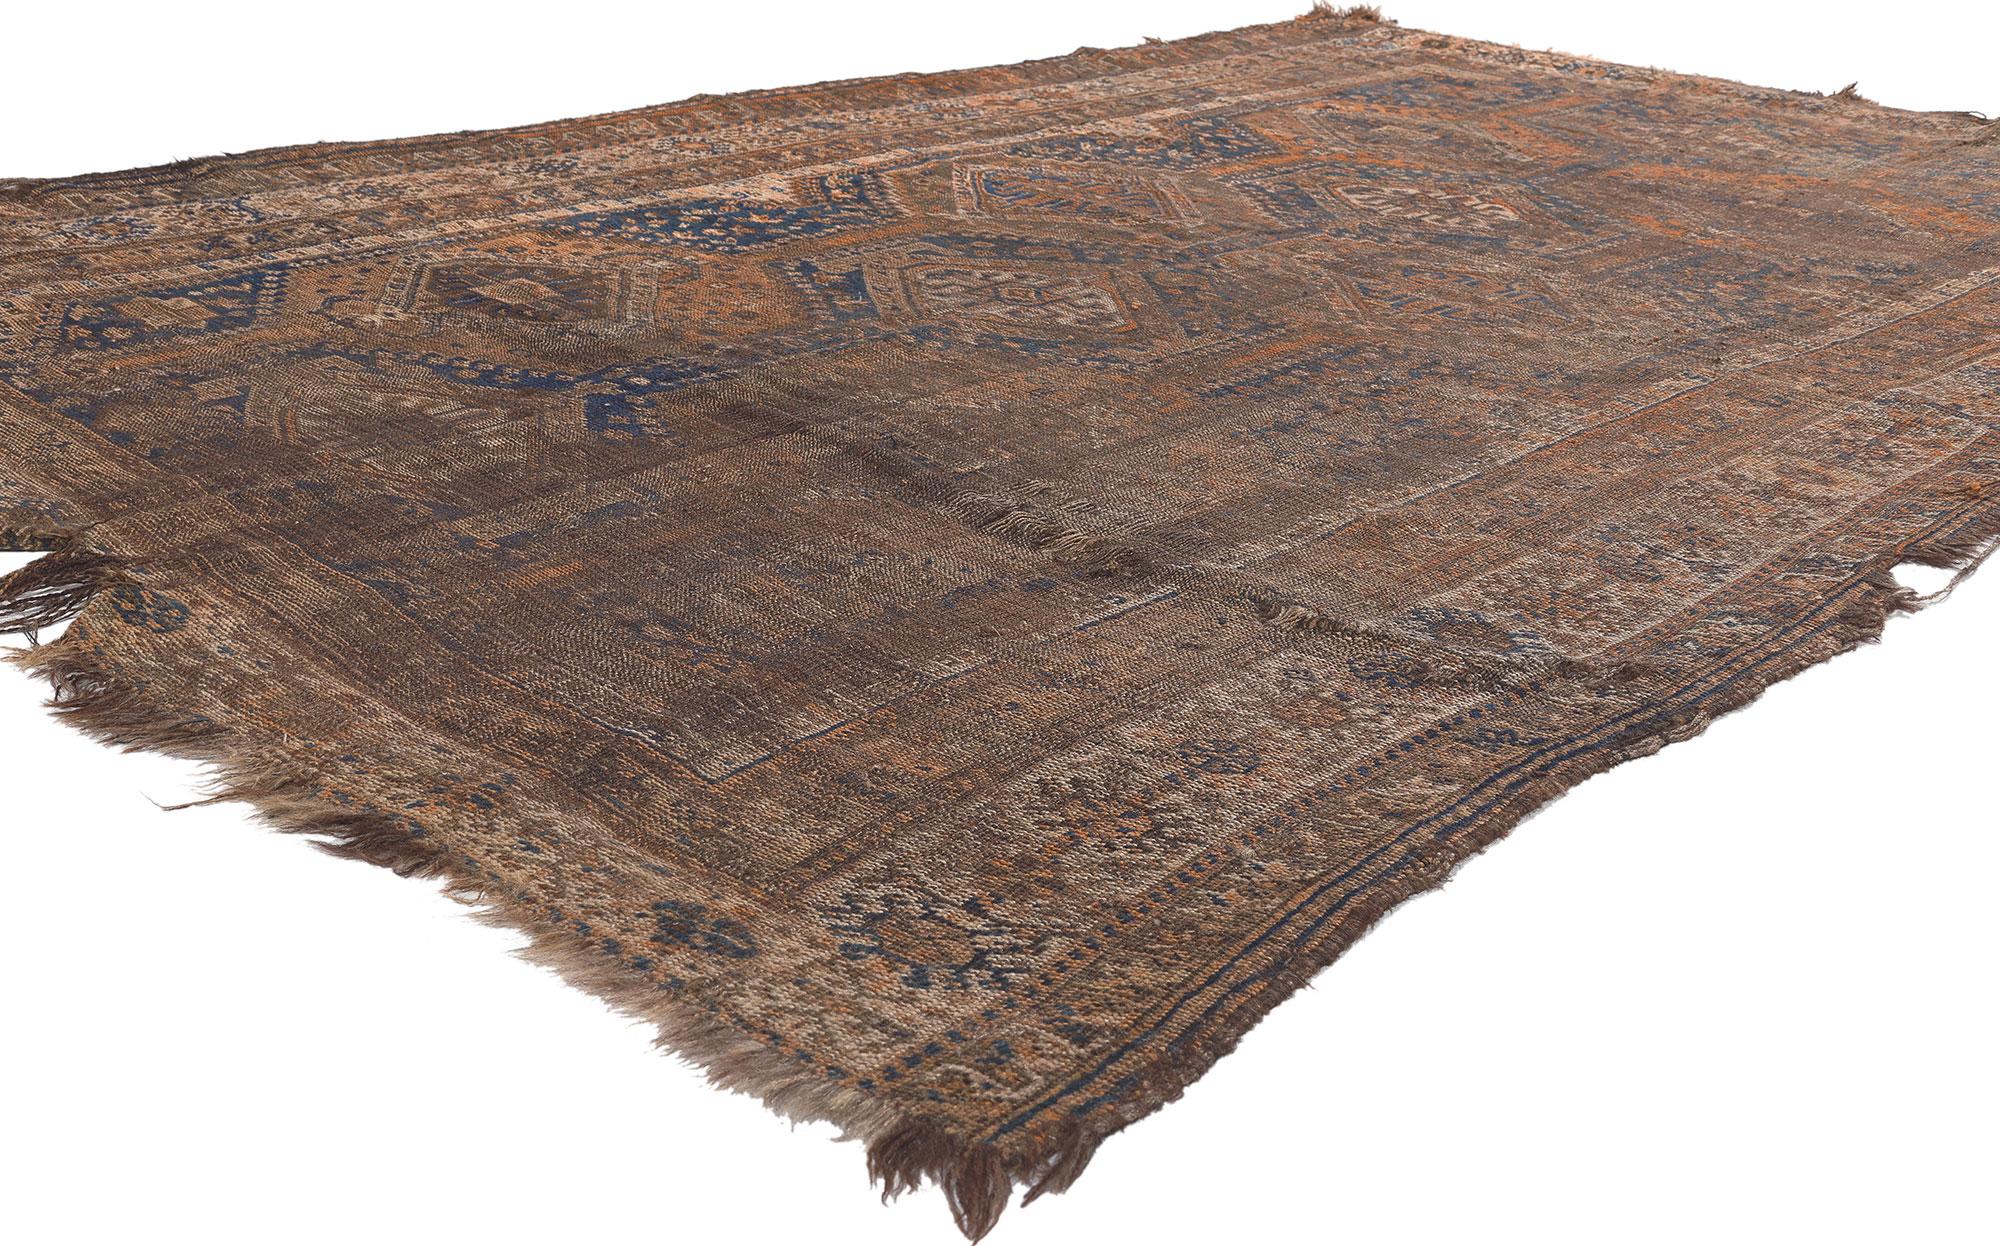 78530 Distressed Antique-Worn Persian Shiraz Rug, 05'10 x 09'05. A Persian Shiraz rug is a traditional handmade rug from the city of Shiraz in Iran, belonging to the broader category of Persian rugs. Known for bold colors, geometric patterns, and